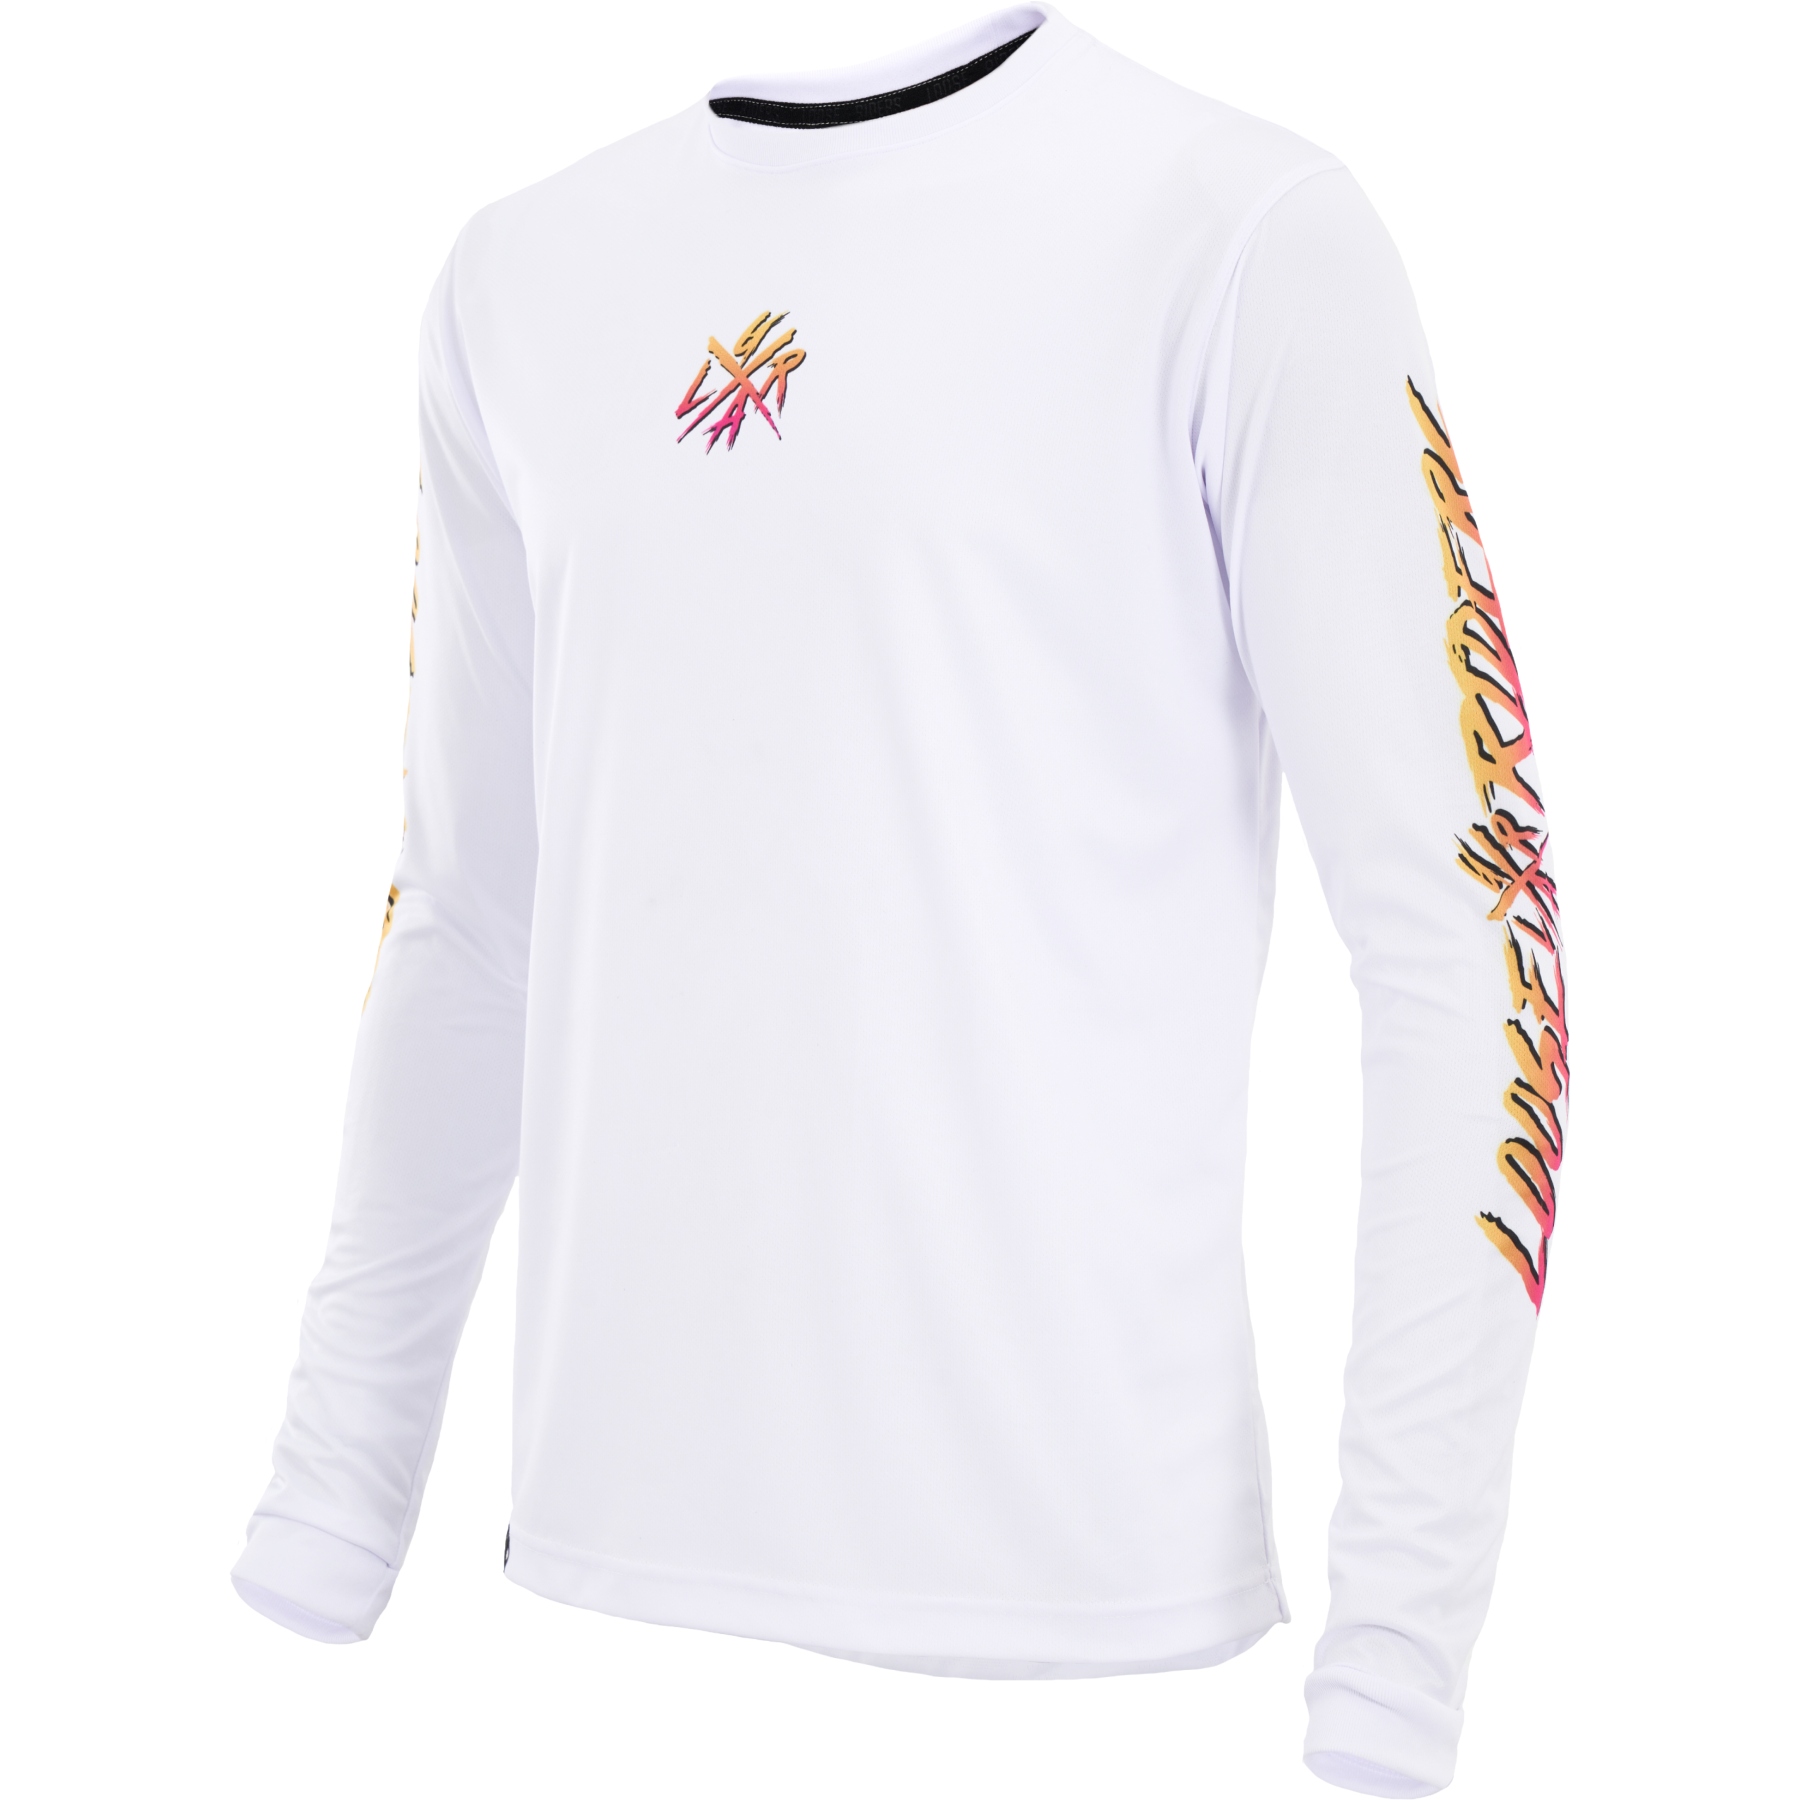 Picture of Loose Riders Cult of Shred Technical Long Sleeve Jersey - Slasher White